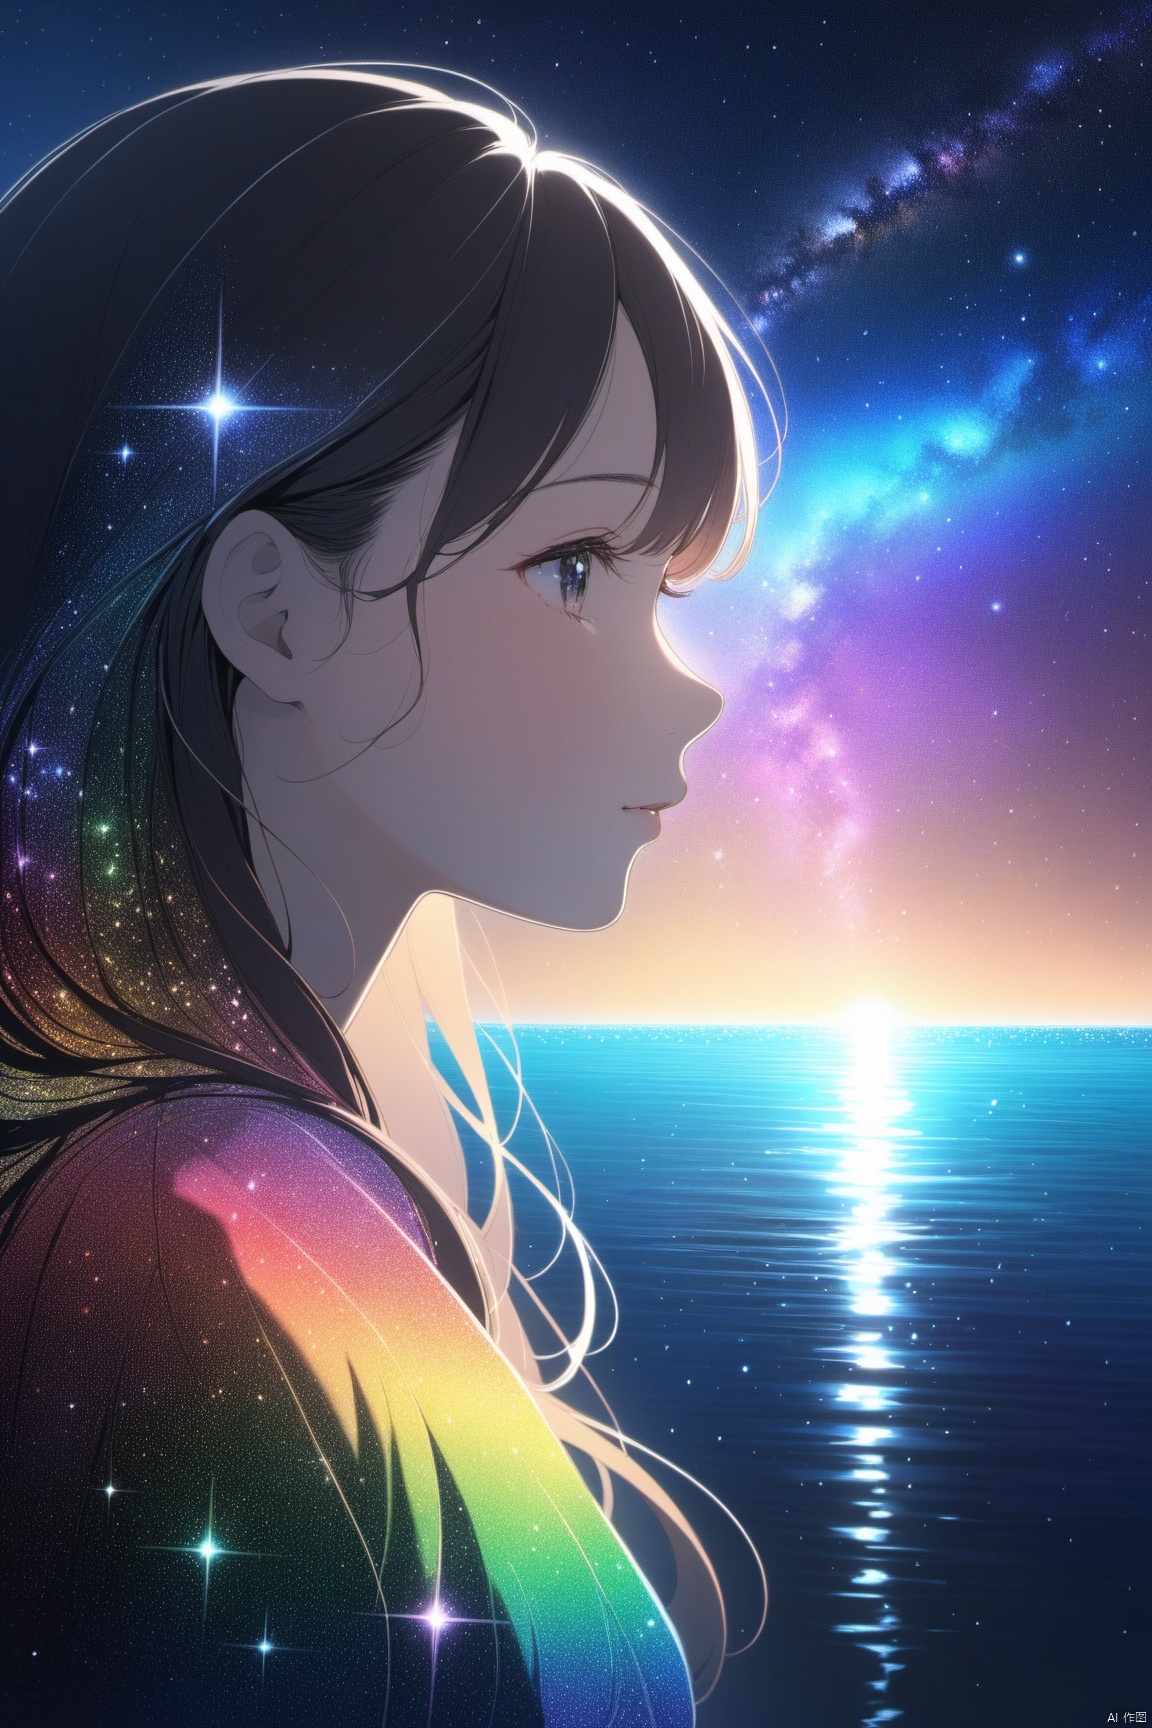 Best quality,masterpiece,1 girl,closeup,portrait,upper body,left,face from side,on the sea,(under the starry sky:1.1),the sea reflects the starry sky,rainbow color light reflected on the girl's face,sparkling lights,magical atmosphere,pointillism,Silhouette view,Cosmic wonders,Mysterious and colorful,nebula light,cosmic light,galactic light,Astronomical view,Macroscopic perspective,perspective view,masterpiece,